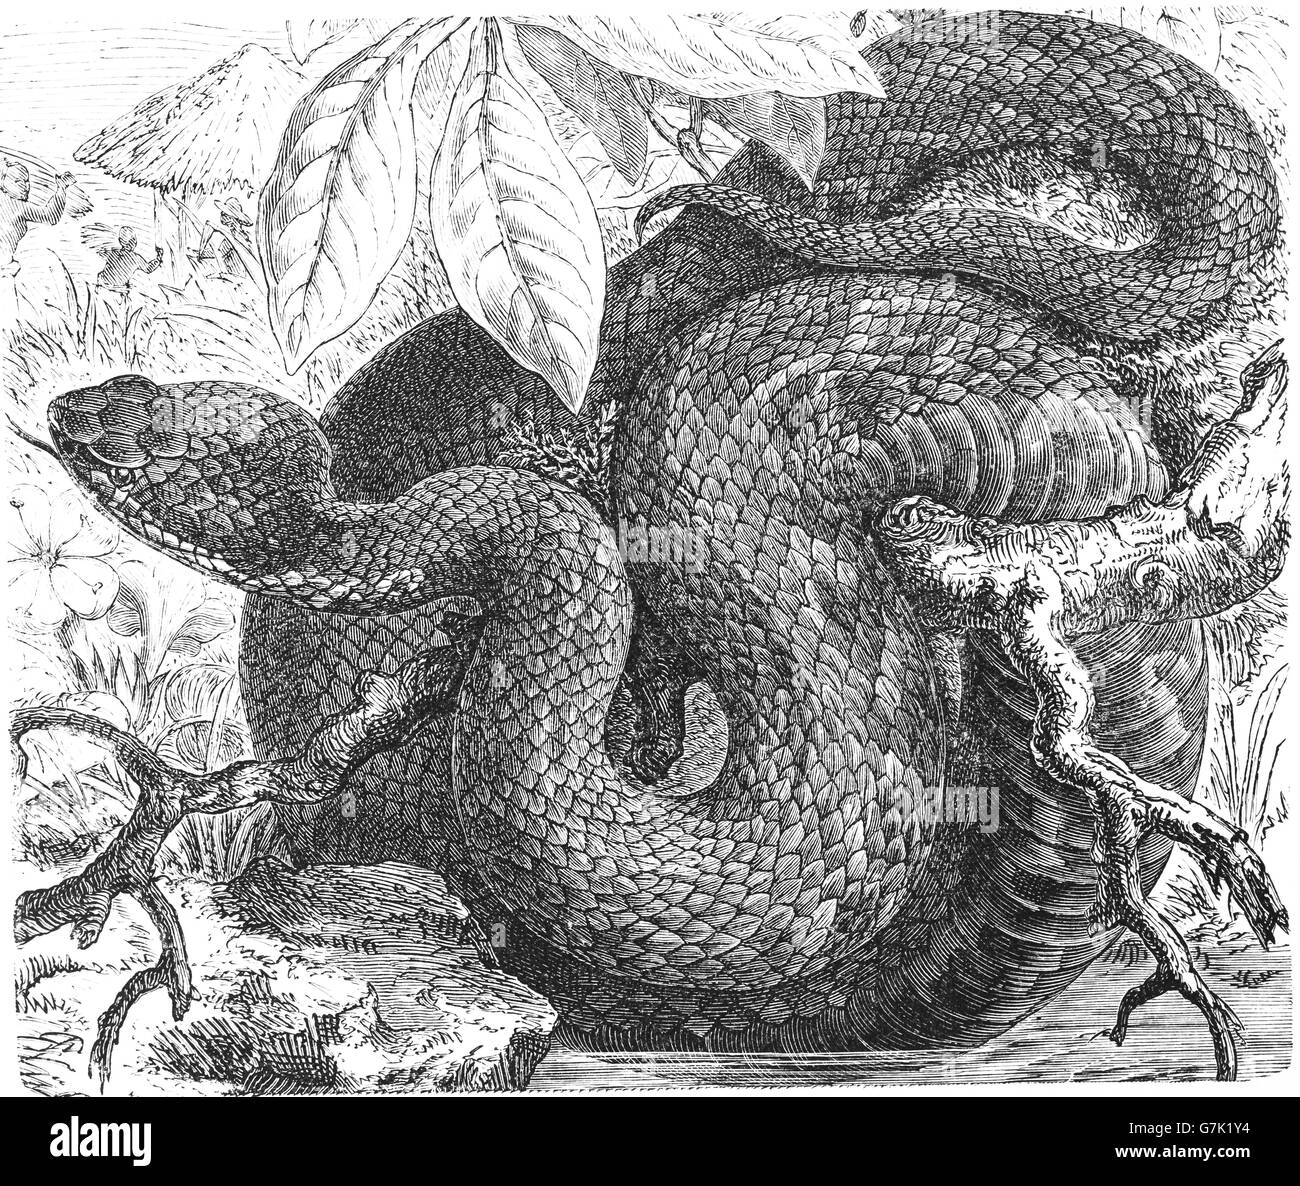 Water moccasin, swamp moccasin, black moccasin, cottonmouth, gapper, Agkistrodon piscivorus, illustration from book dated 1904 Stock Photo